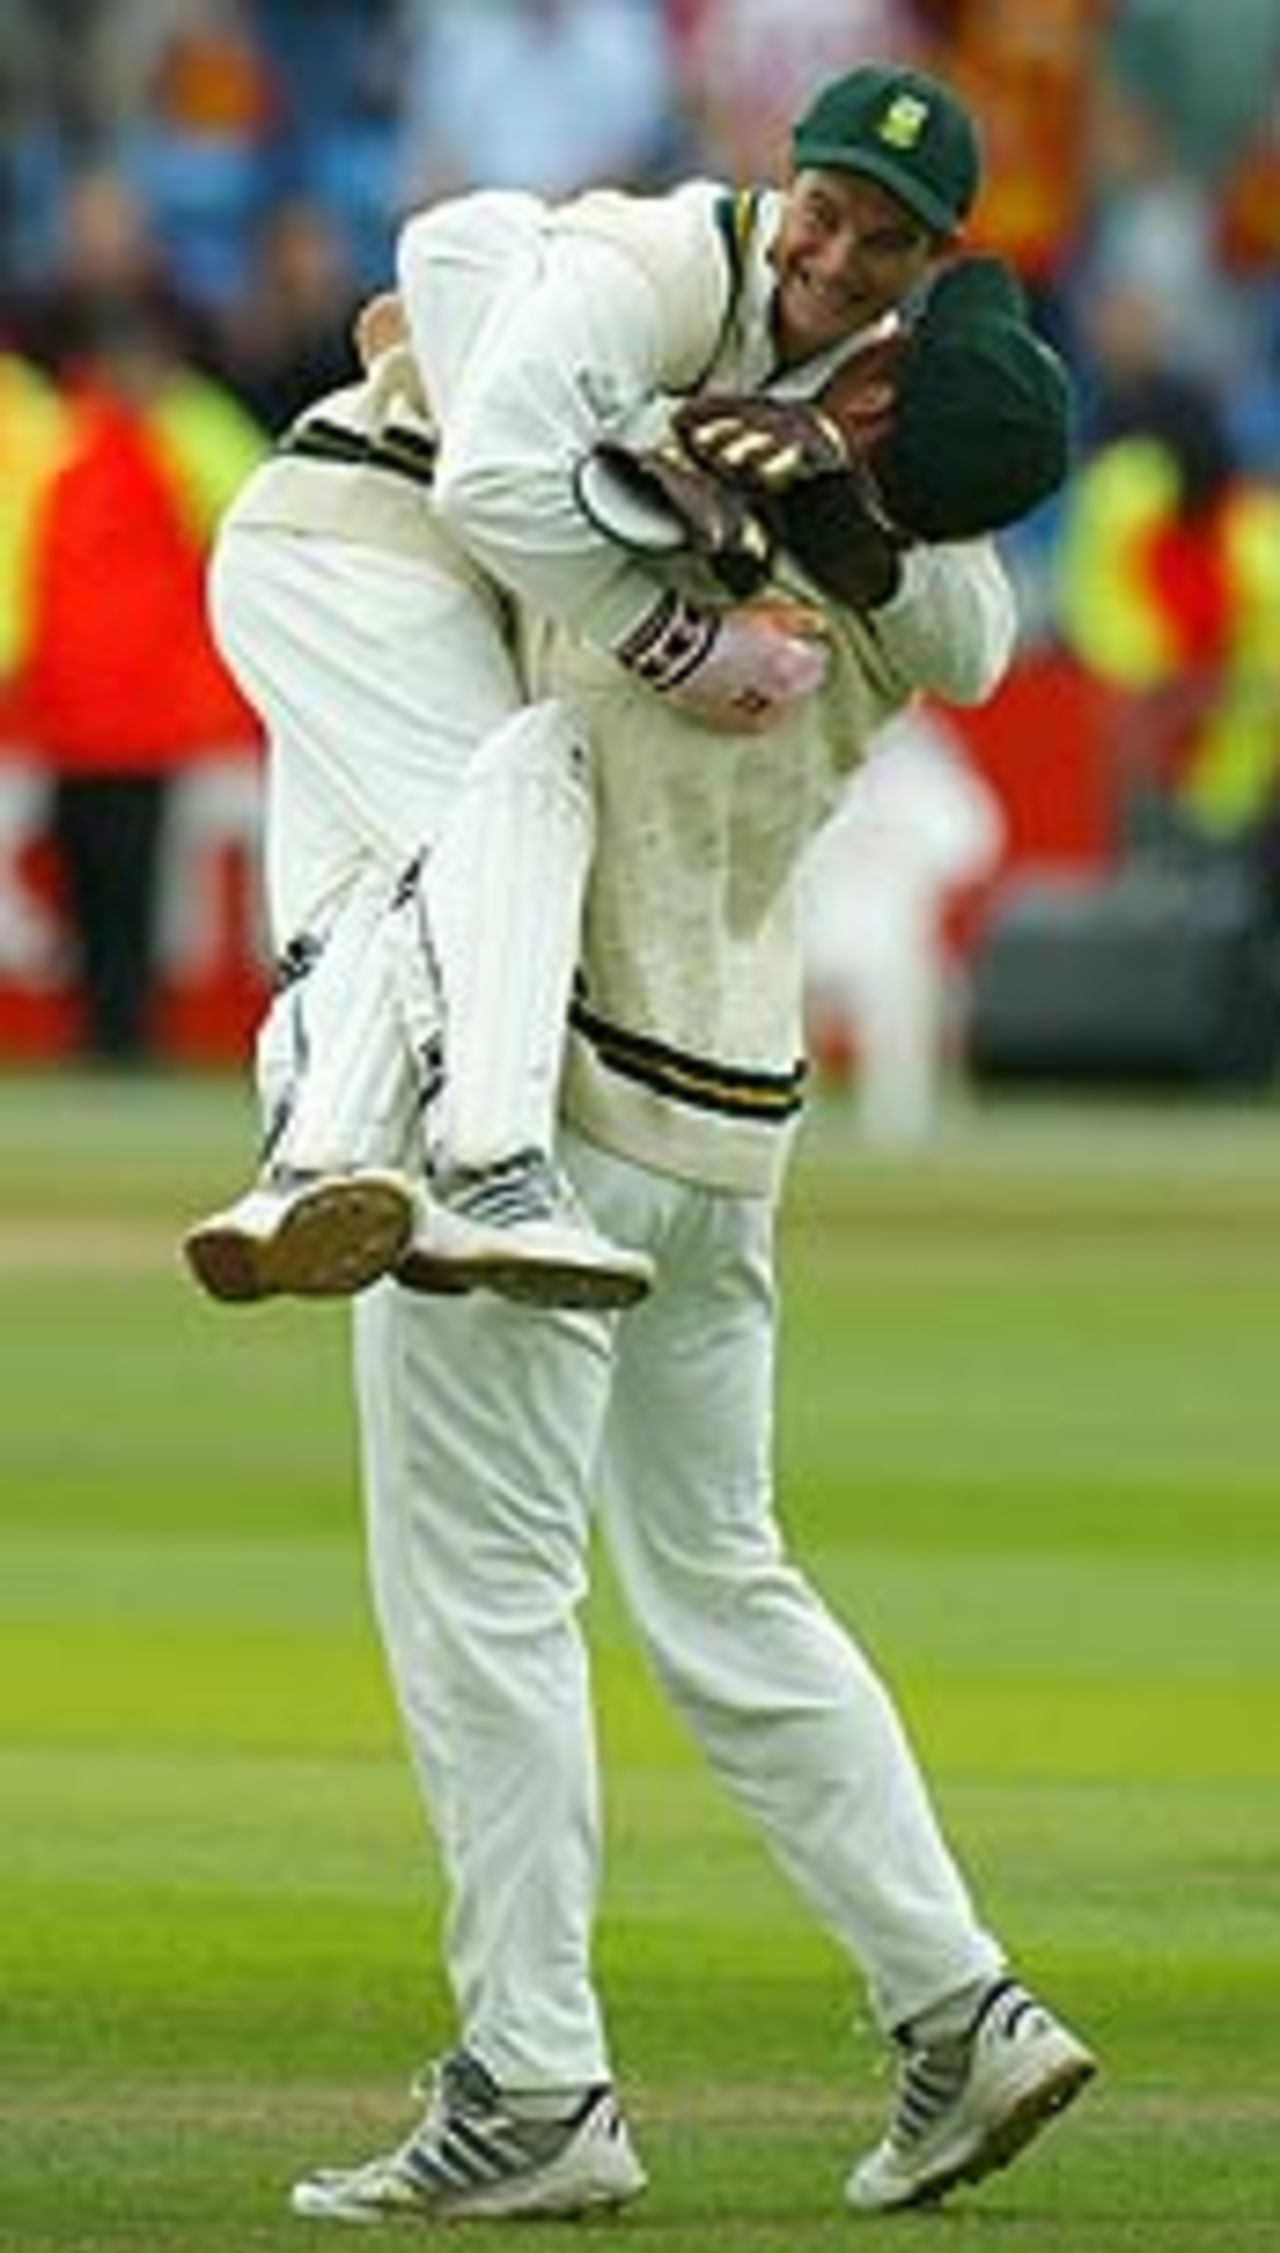 Graeme Smith and Mark Boucher celebrate, England v South Africa, 4th Test Headingley, August 25 2003